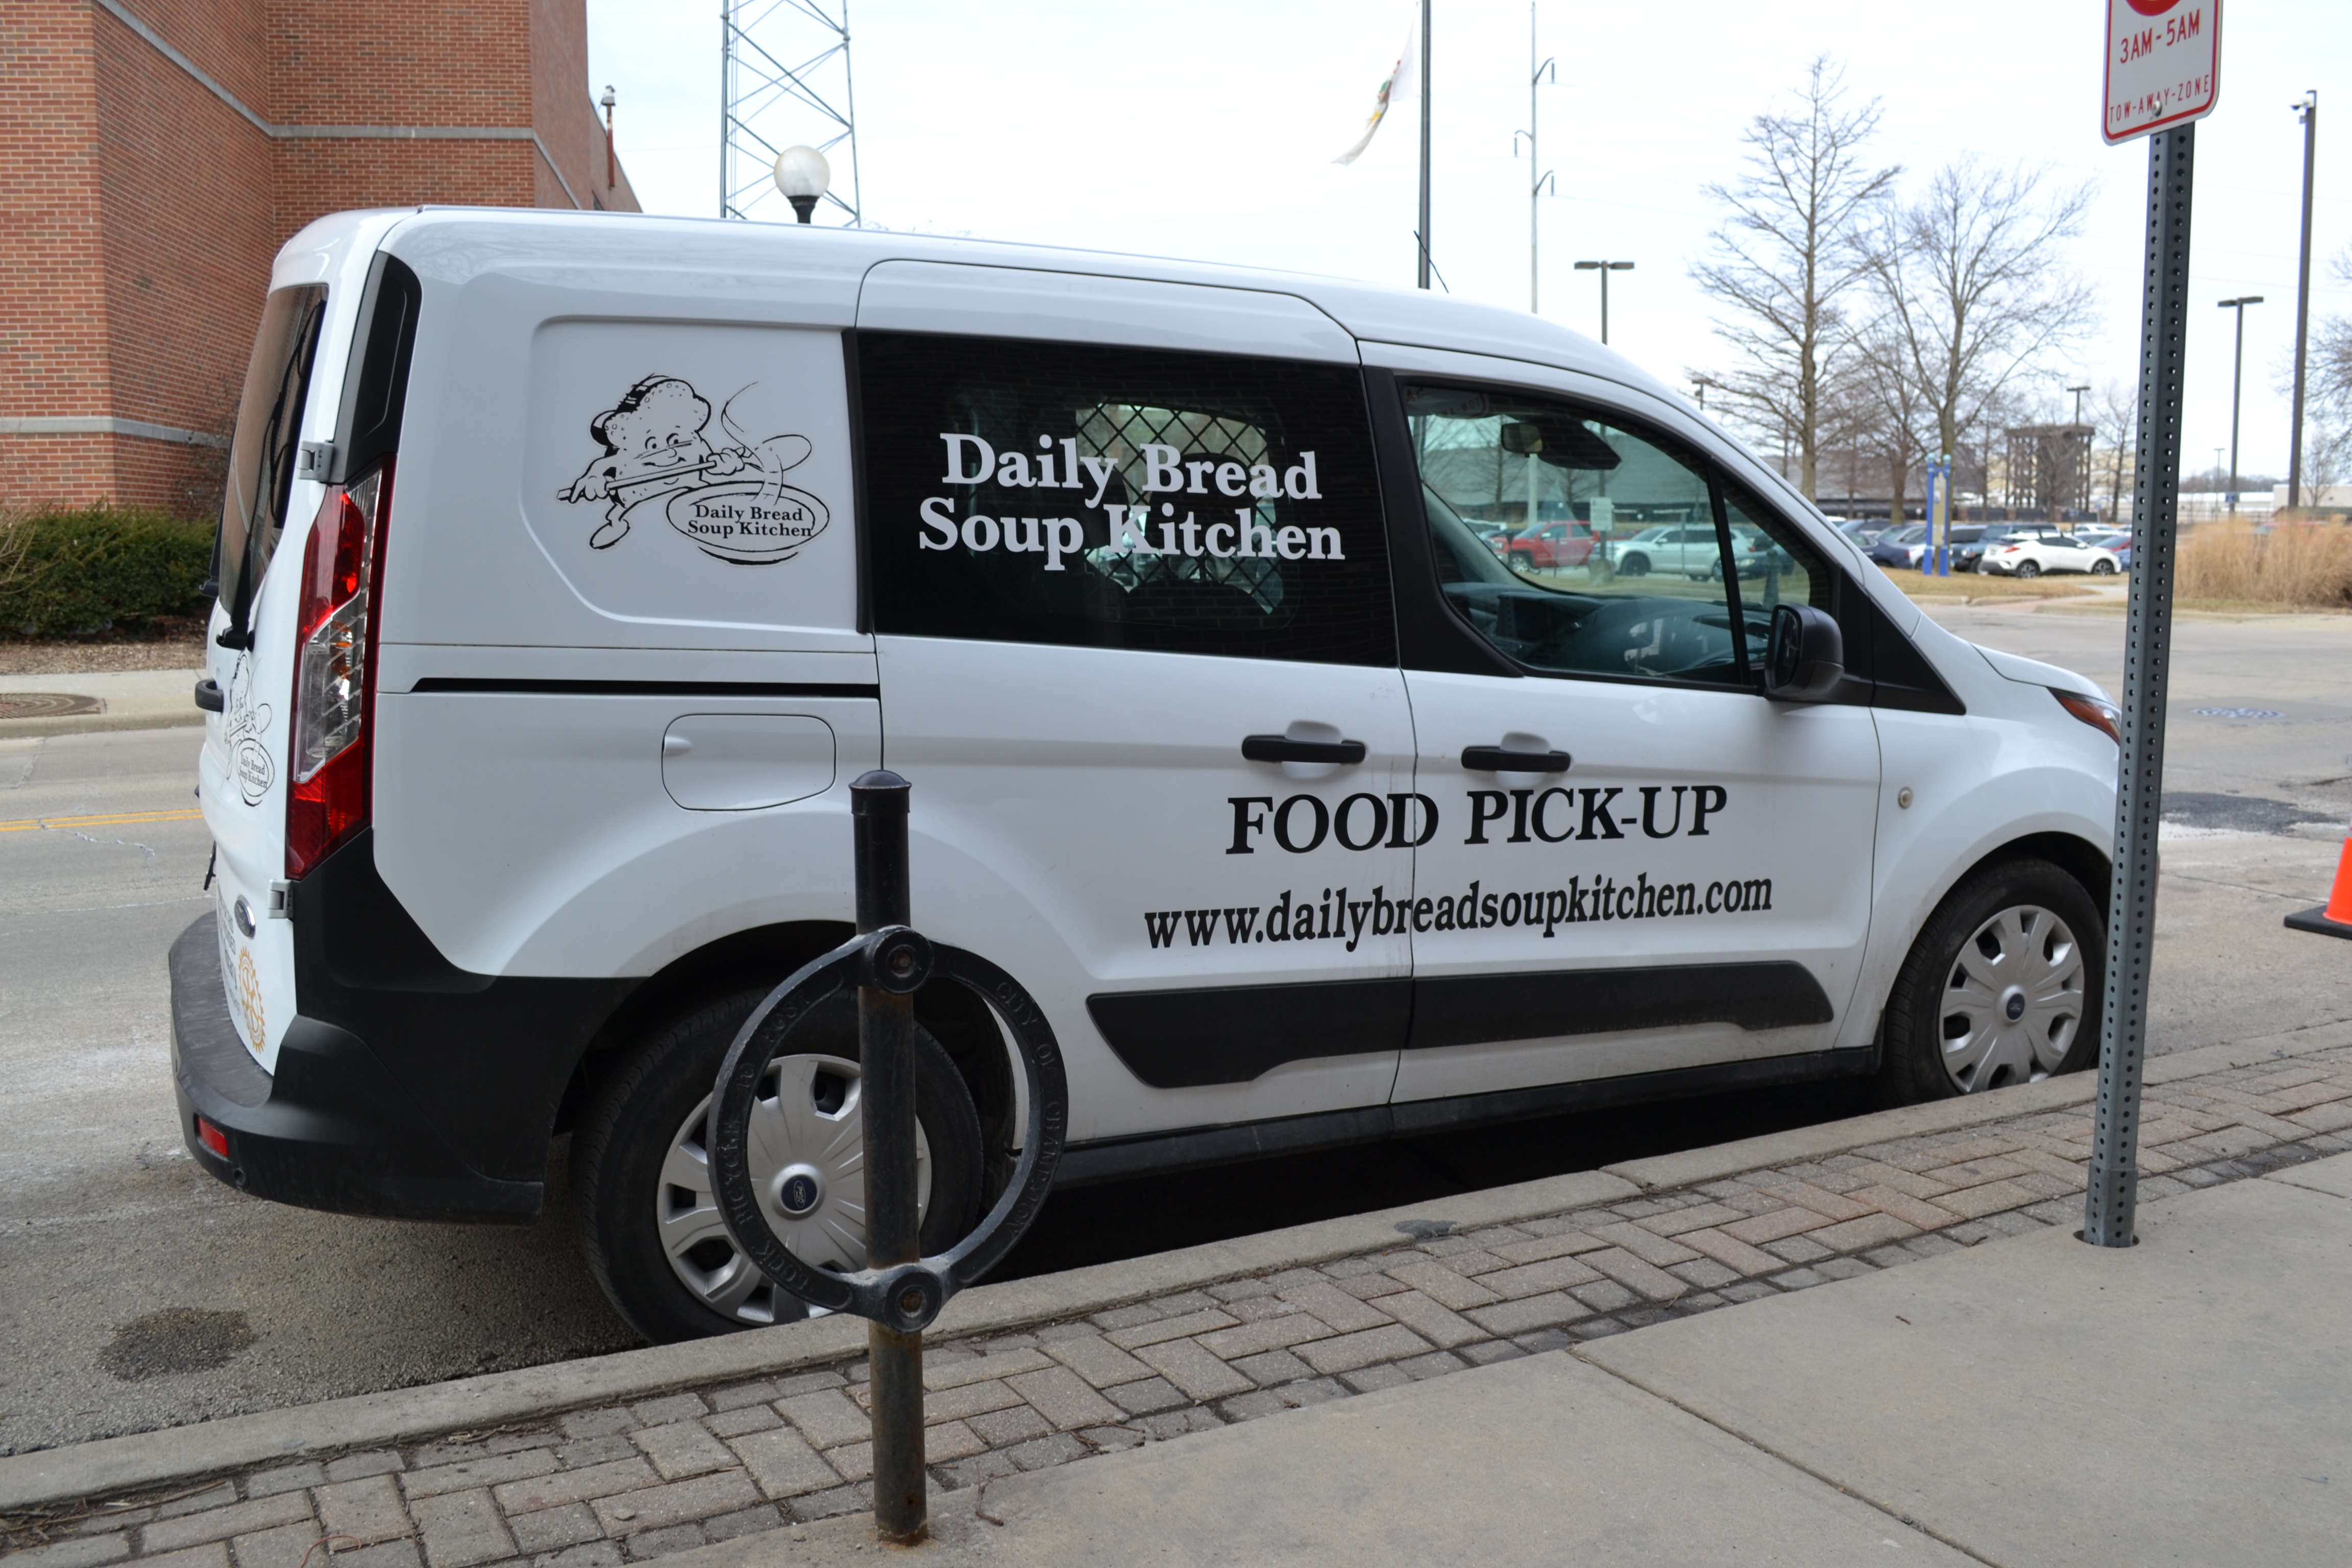 Outside of the Daily Bread Soup Kitchen, there is a van with the organization's name on the side. Photo by Alyssa Buckley.